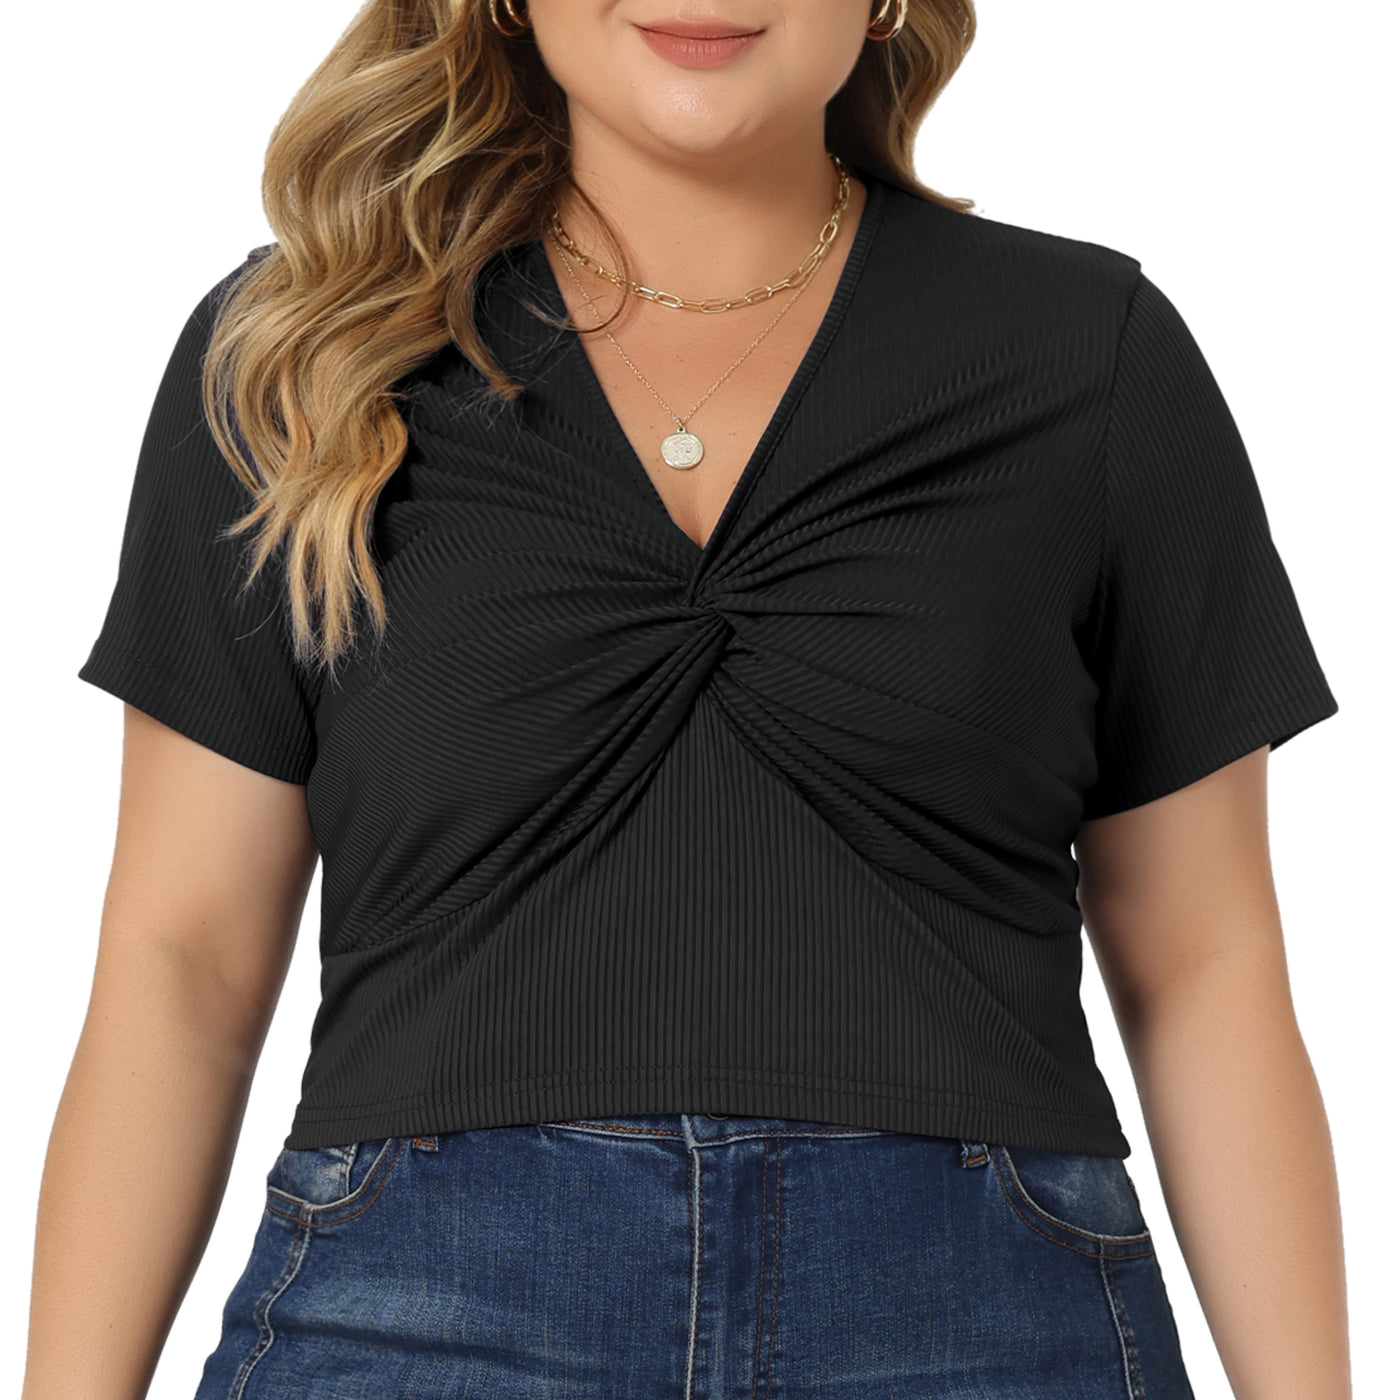 Bublédon Plus Size Blouse for Women Twist Front V Neck Ribbed Short Sleeve Casual Solid Tops